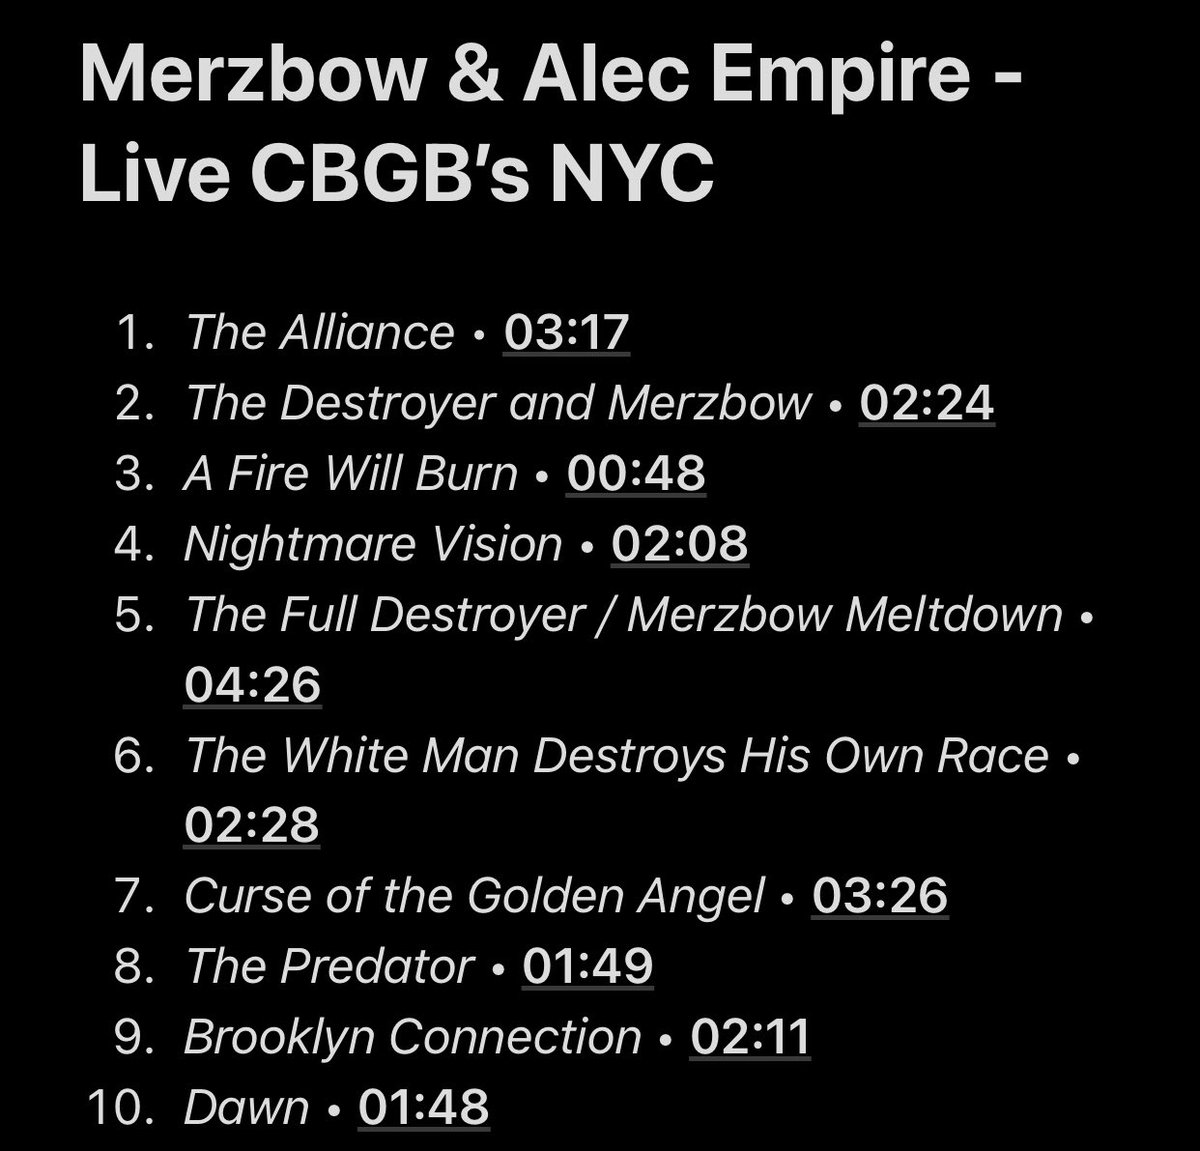 37/108: Live CBGB’s NYC (with Alec Empire)In this collaborative live album, Alec Empire and Merzbow made a rough, dark and brutal piece of music between Breakcore and Noise. This combination is very entertaining and makes this project a hidden gem in Merzbow discography.